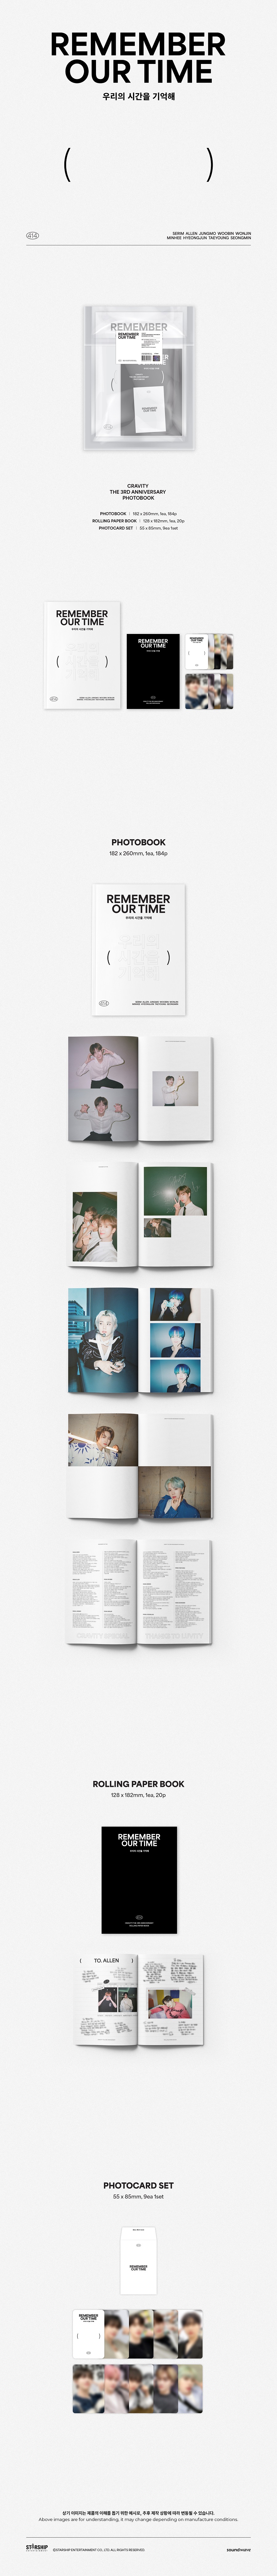 CRAVITY(크래비티) - CRAVITY THE 3RD ANNIVERSARY PHOTOBOOK [REMEMBER OUR TIME]